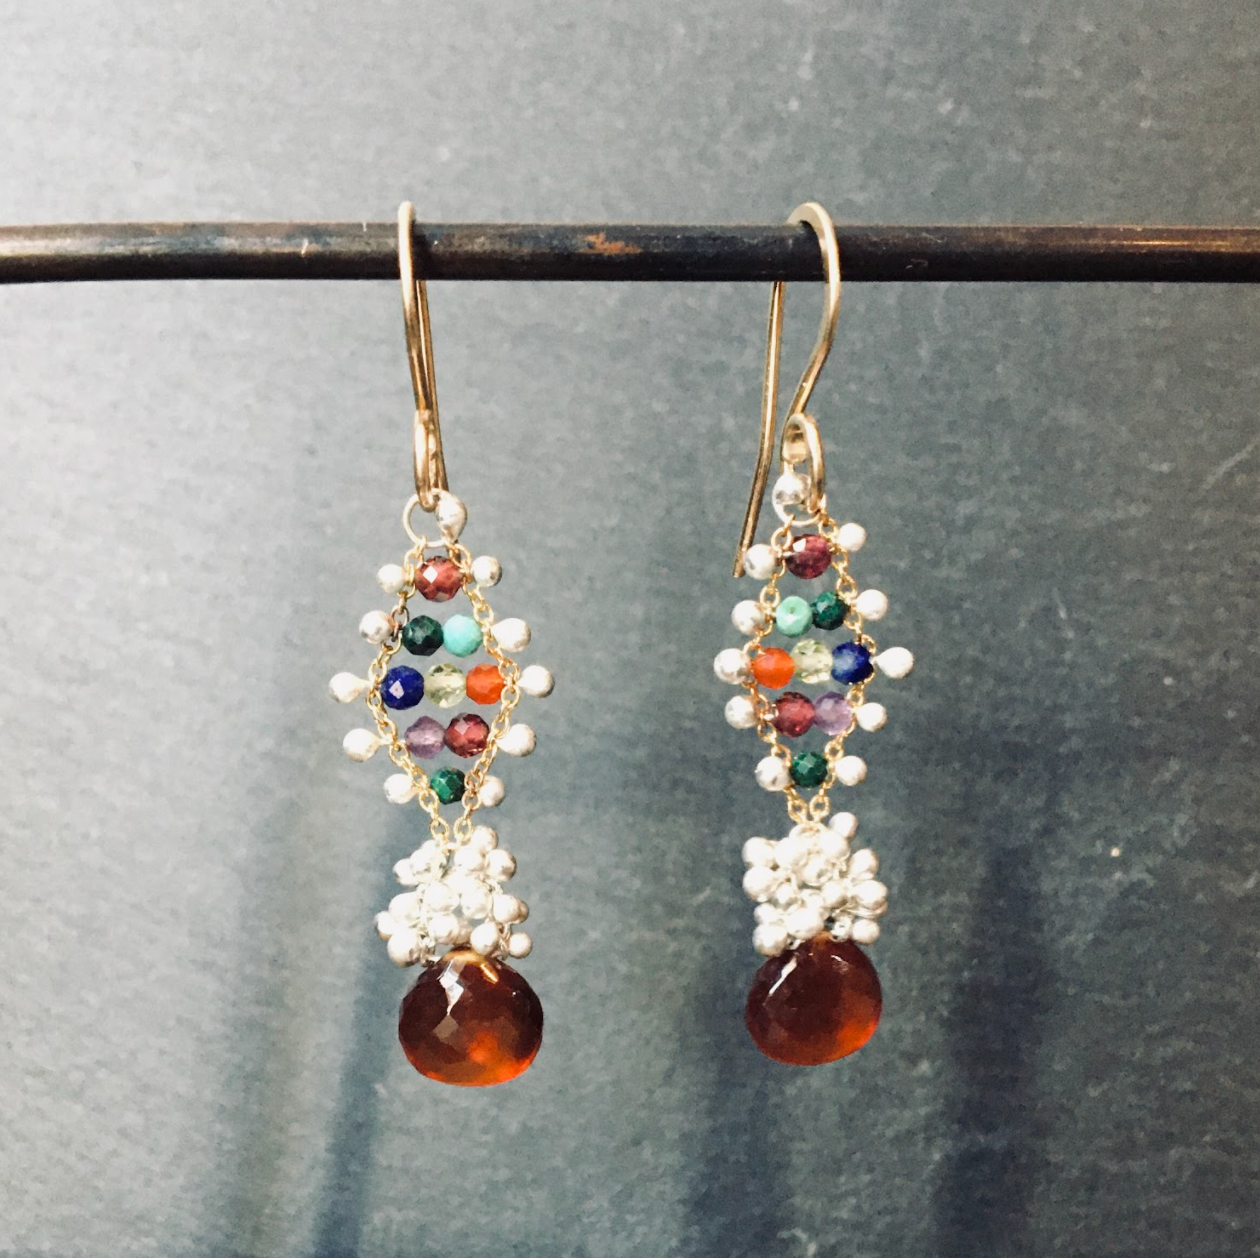 Woven Colorful Earrings with Garnet